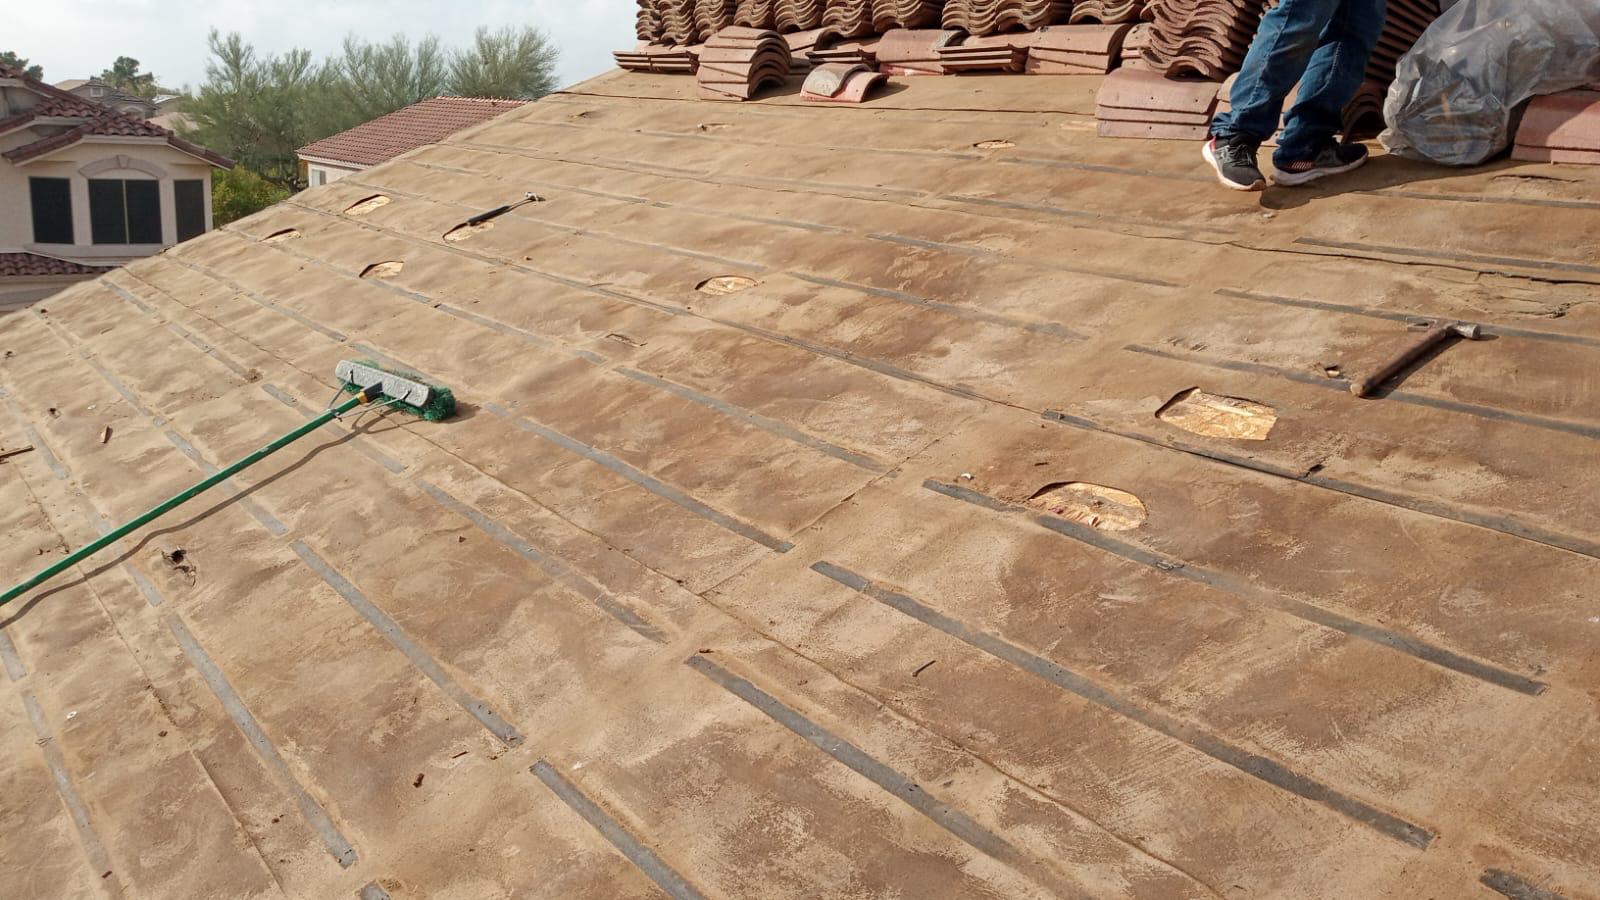 Roof underlayment being prepared for tile re-roofing in Paradise Valley by Behmer Roofing & Sheet Metal.